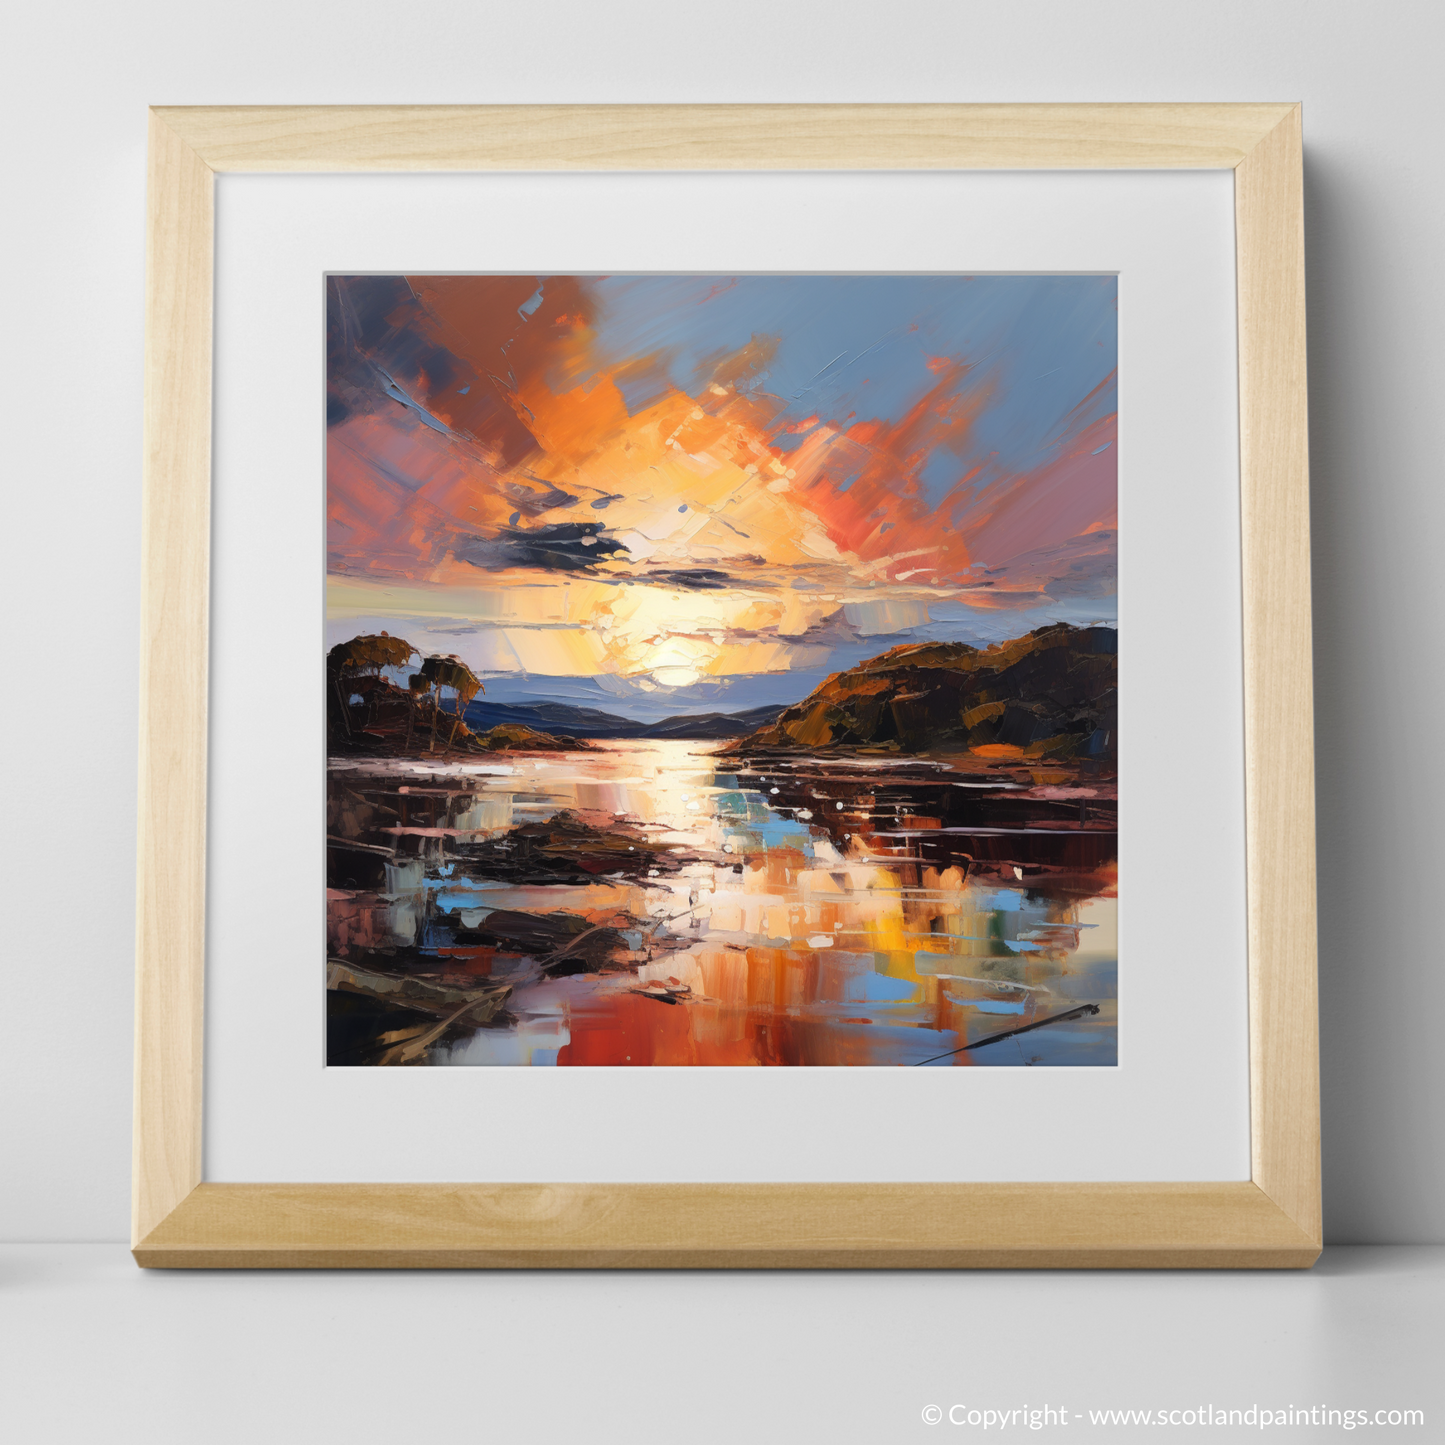 Art Print of Isleornsay Harbour at sunset with a natural frame